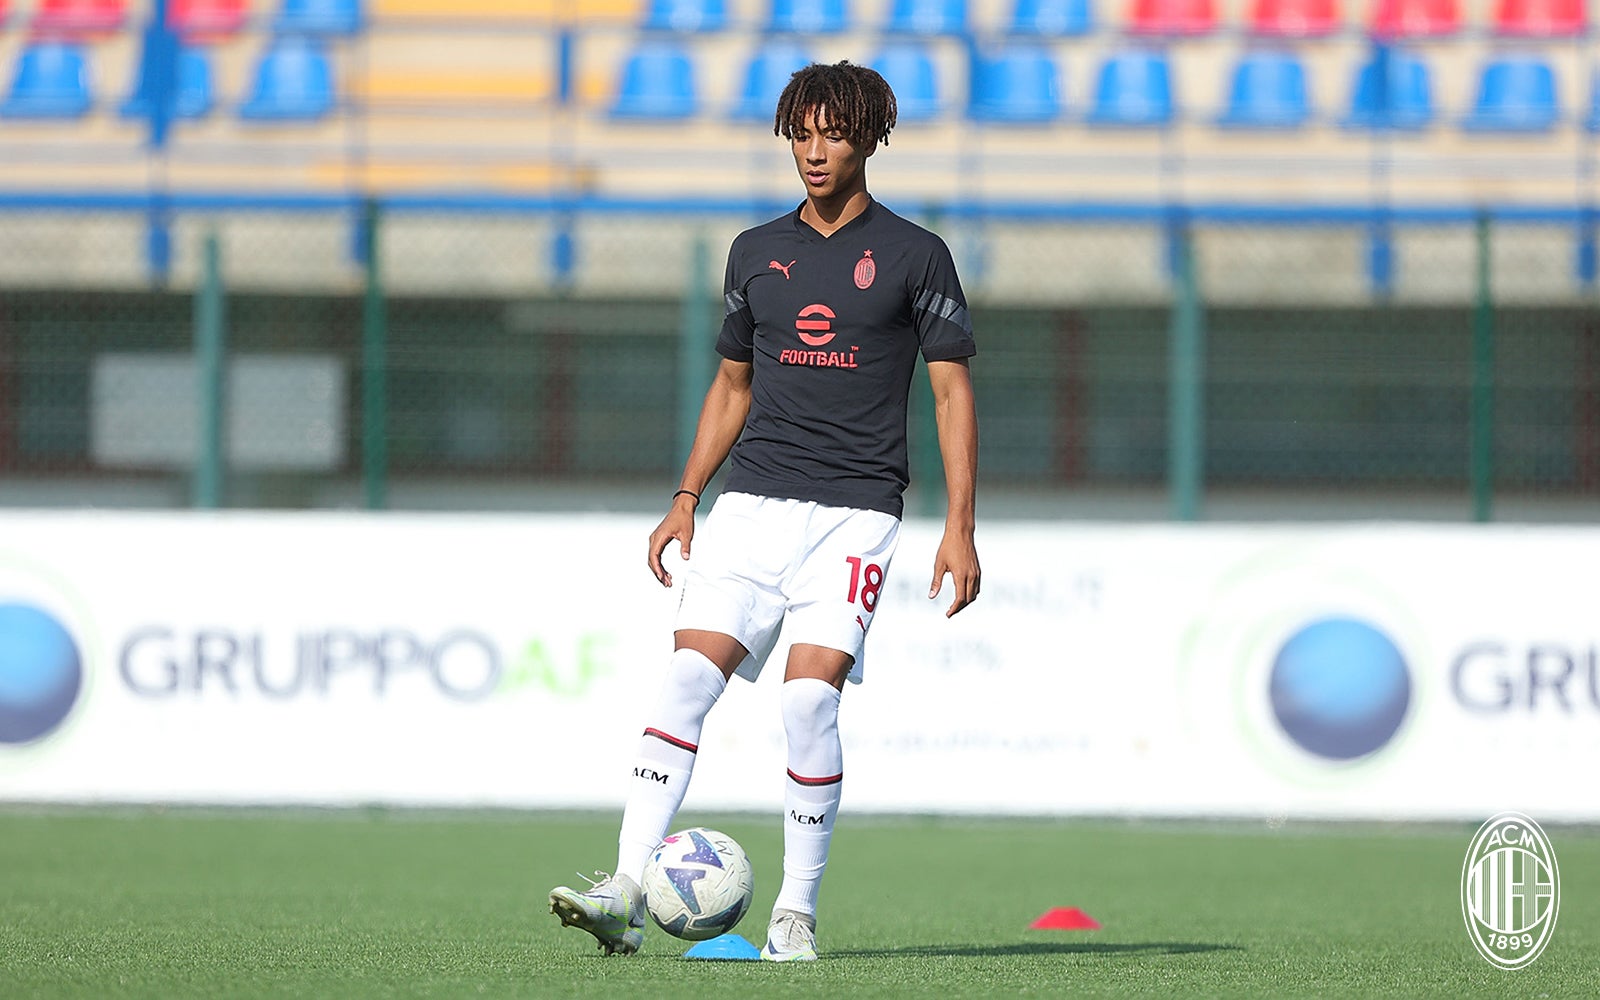 AC Milan Primavera suffer yet another loss against Fiorentina as poor form  continues